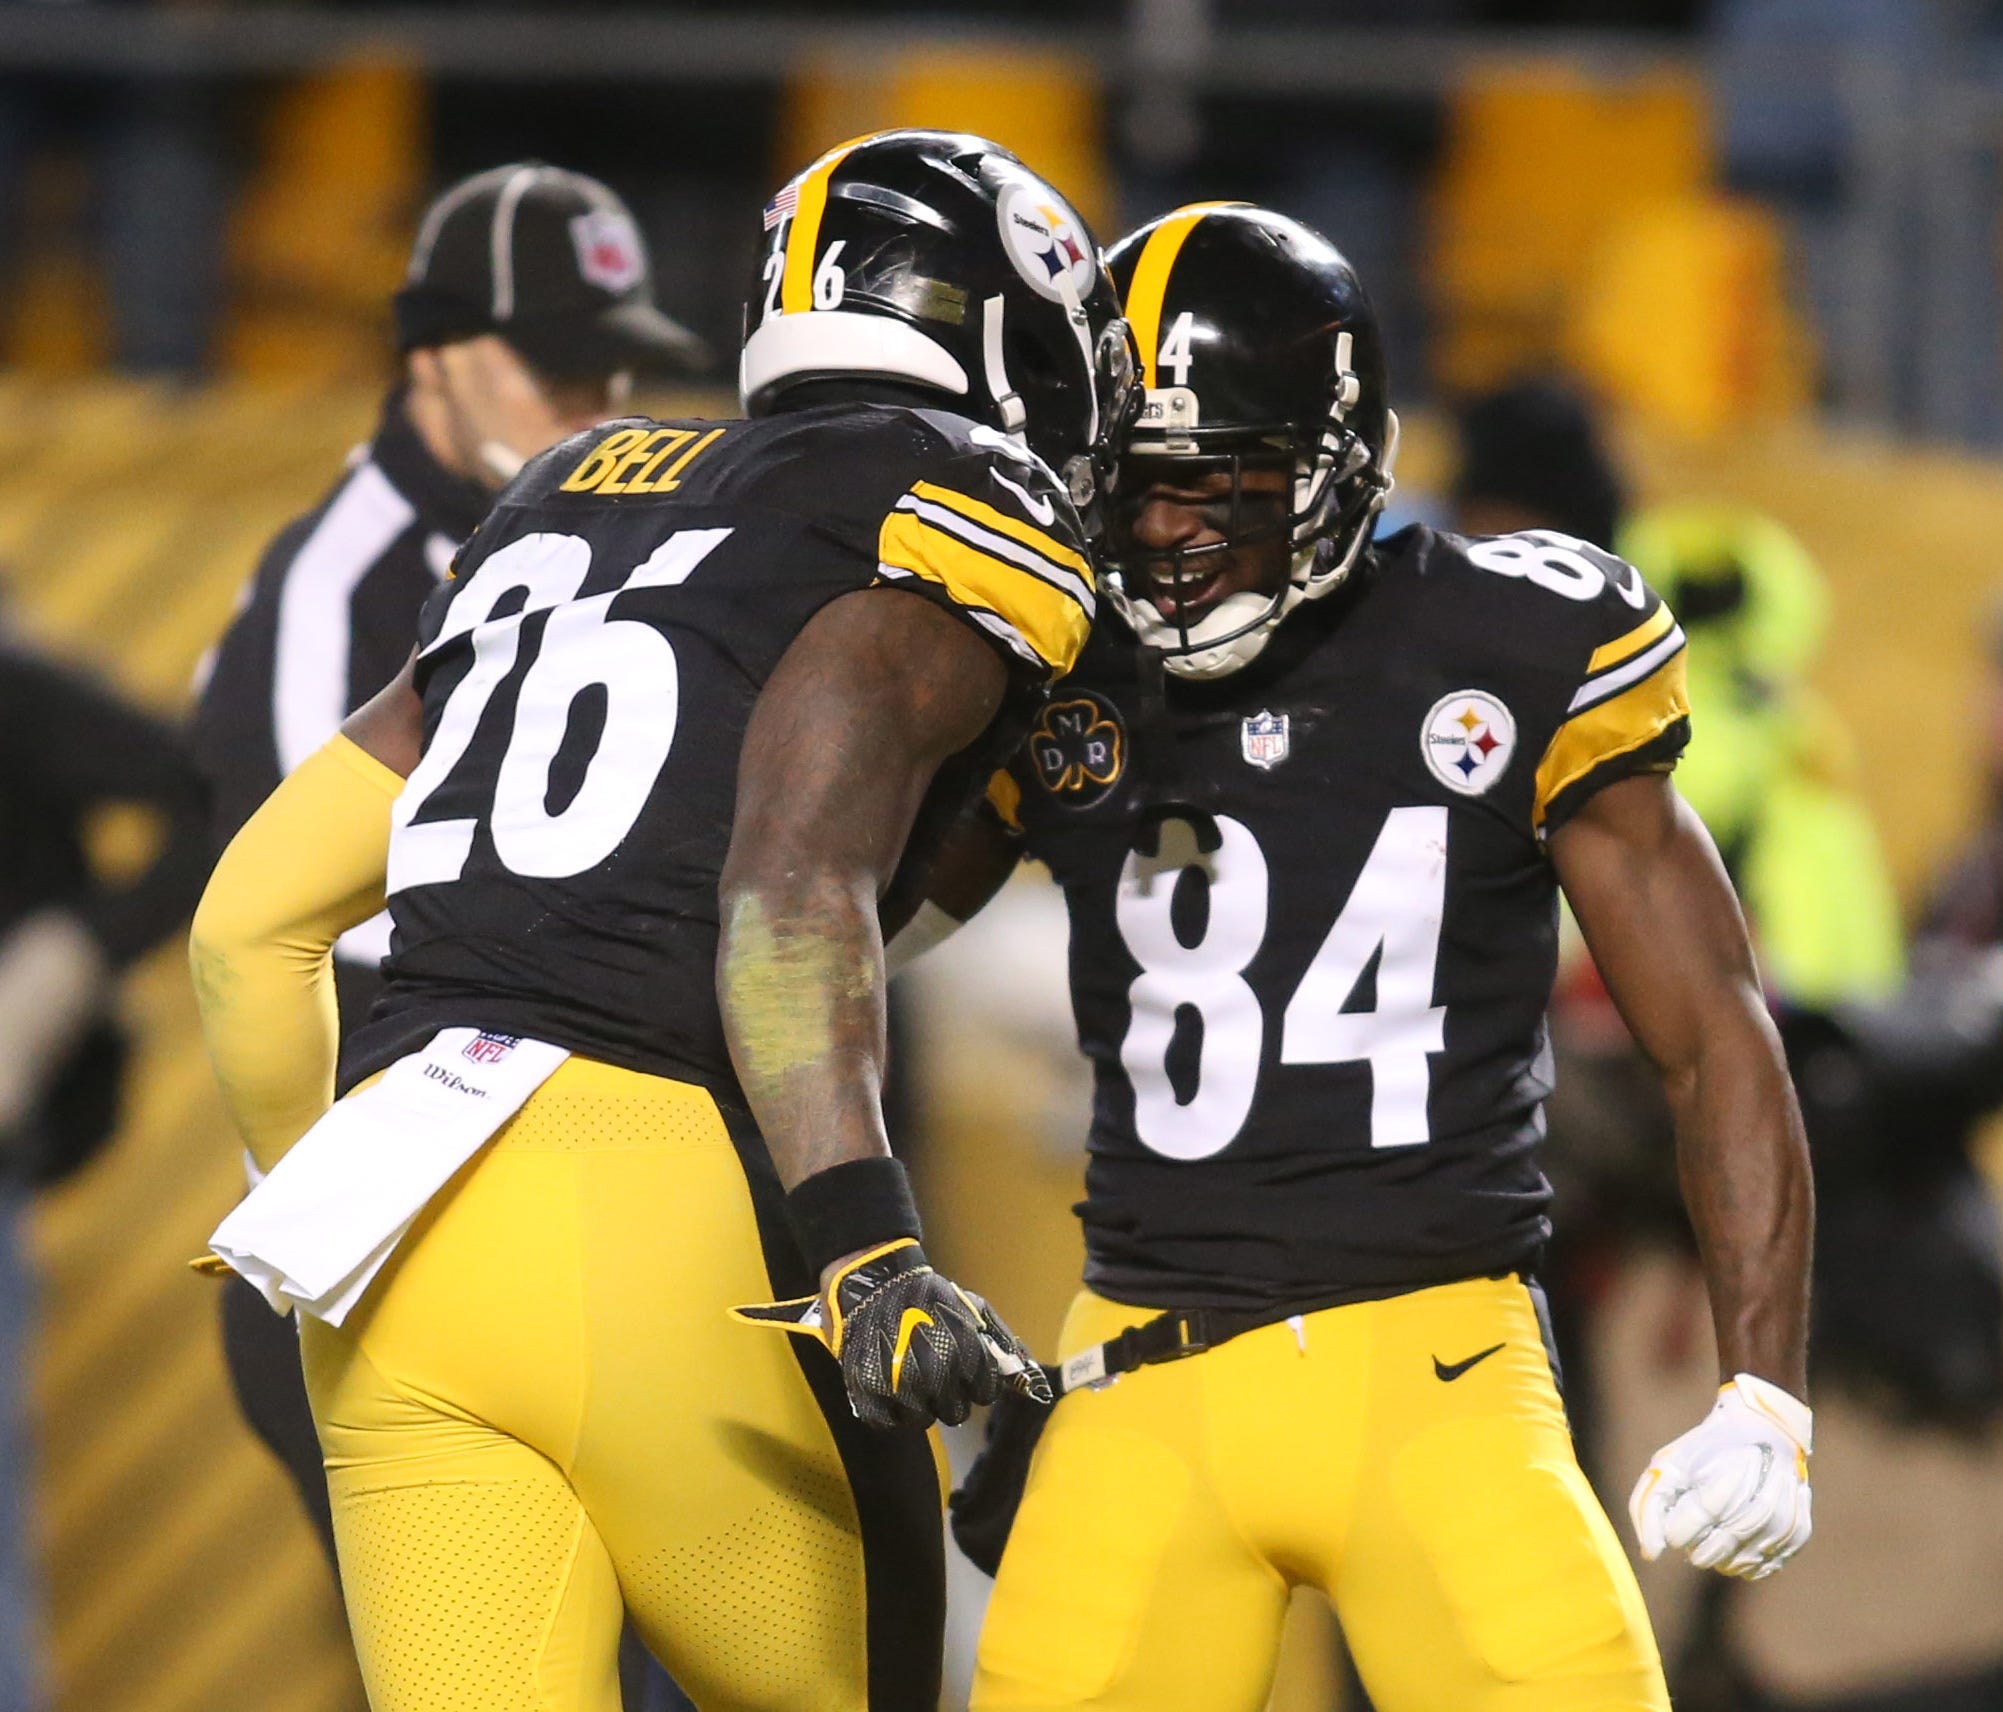 Pittsburgh Steelers running back Le'Veon Bell (26) celebrates with wide receiver Antonio Brown (84) after scoring a touchdown against the Baltimore Ravens during the first quarter at Heinz Field.